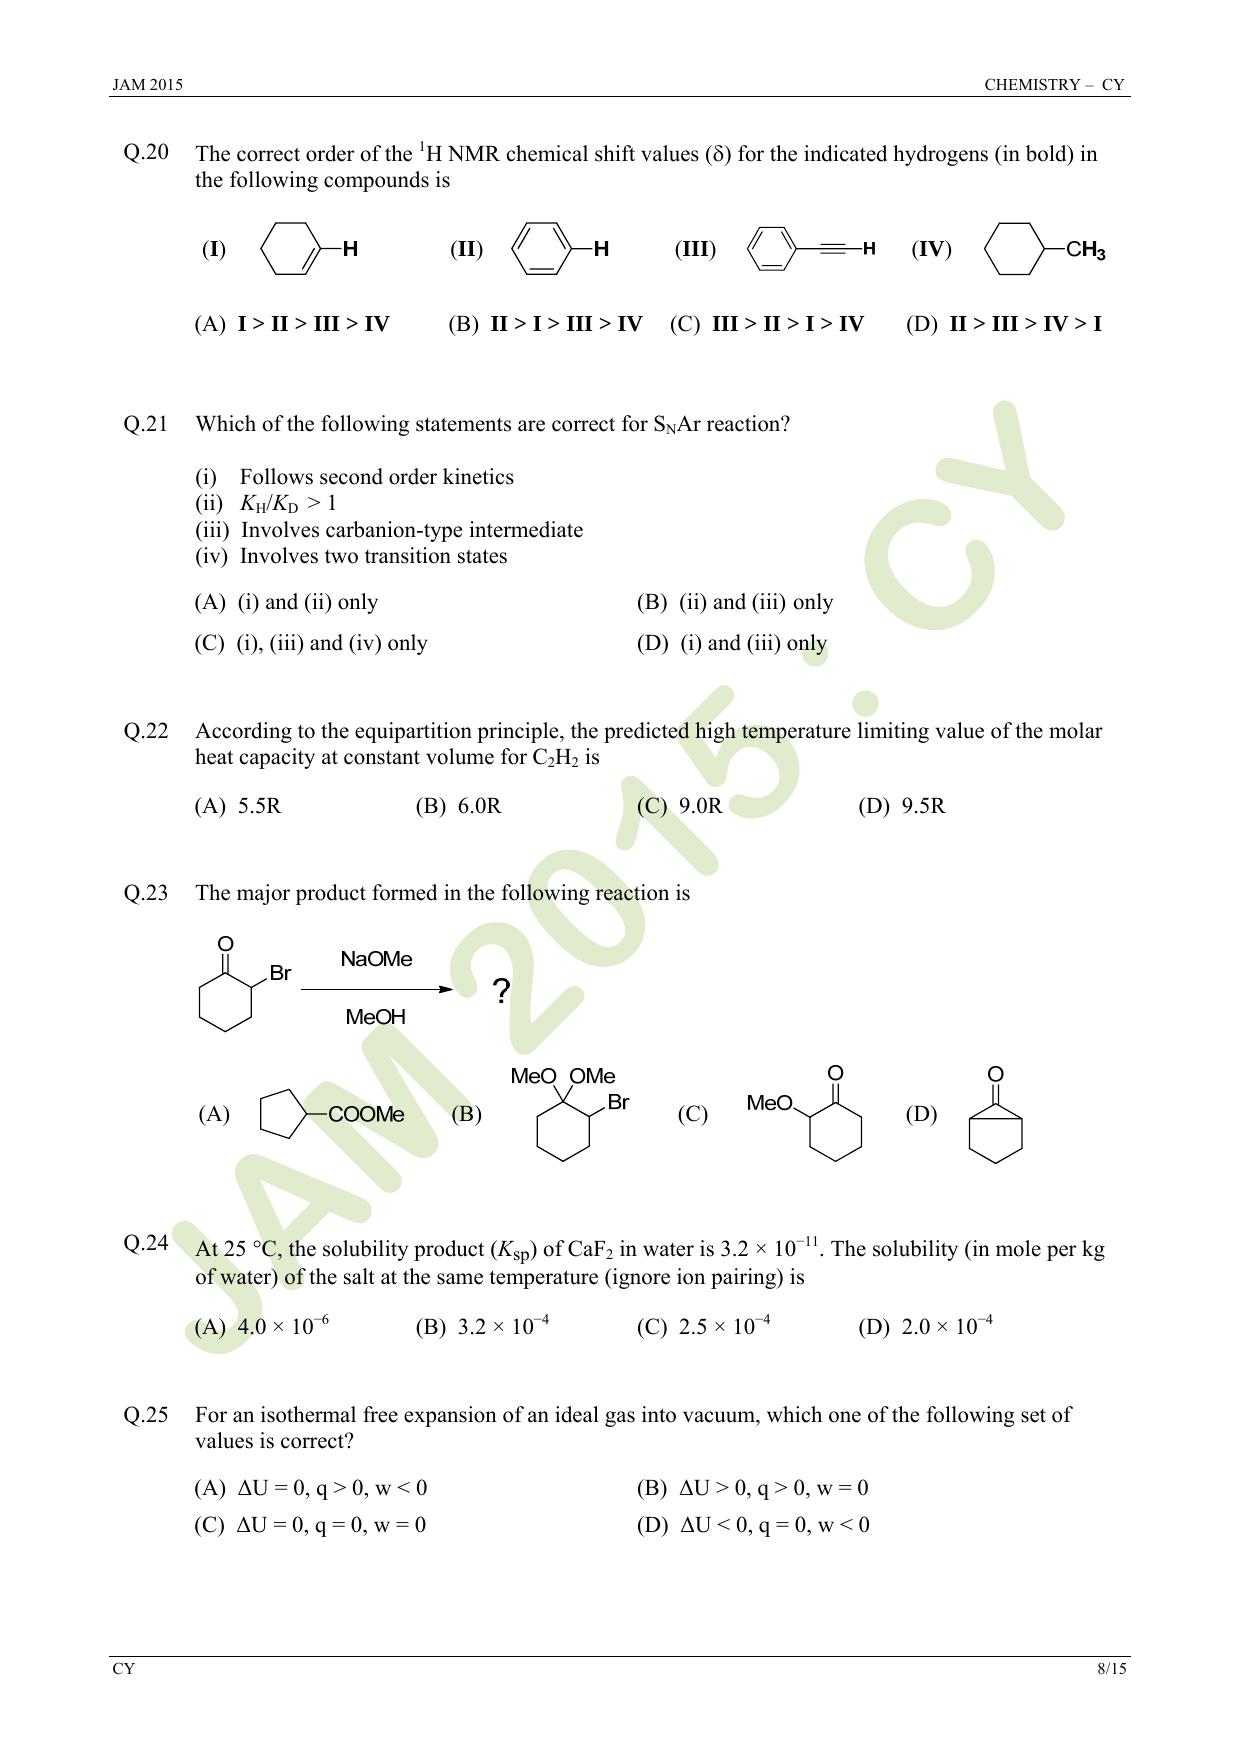 JAM 2015: CY Question Paper - Page 8